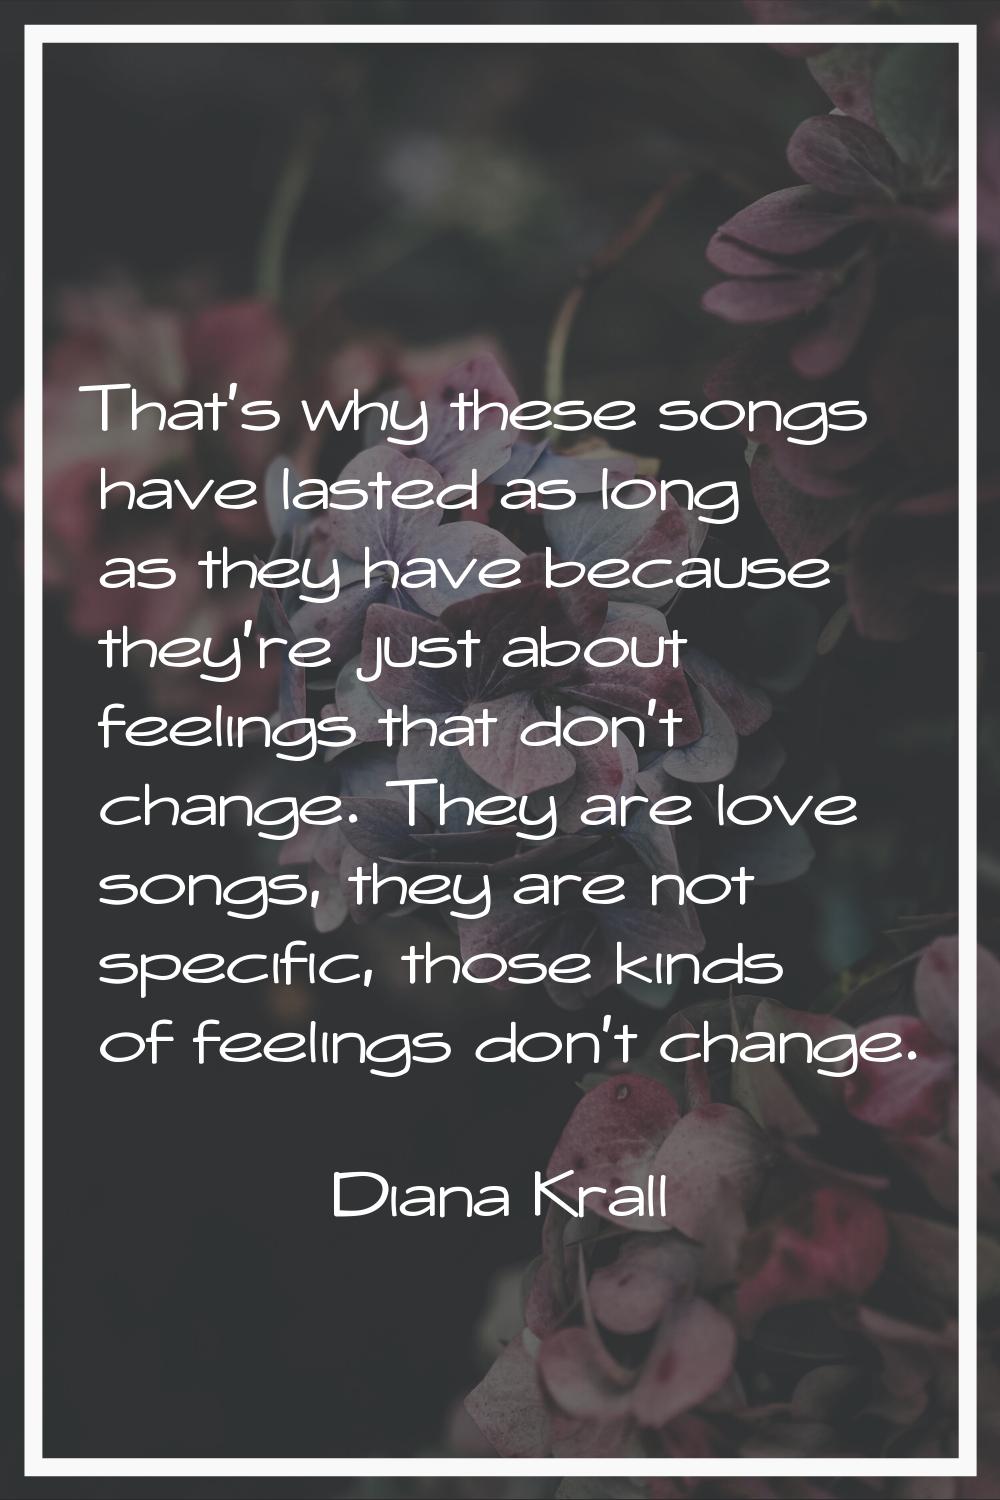 That's why these songs have lasted as long as they have because they're just about feelings that do